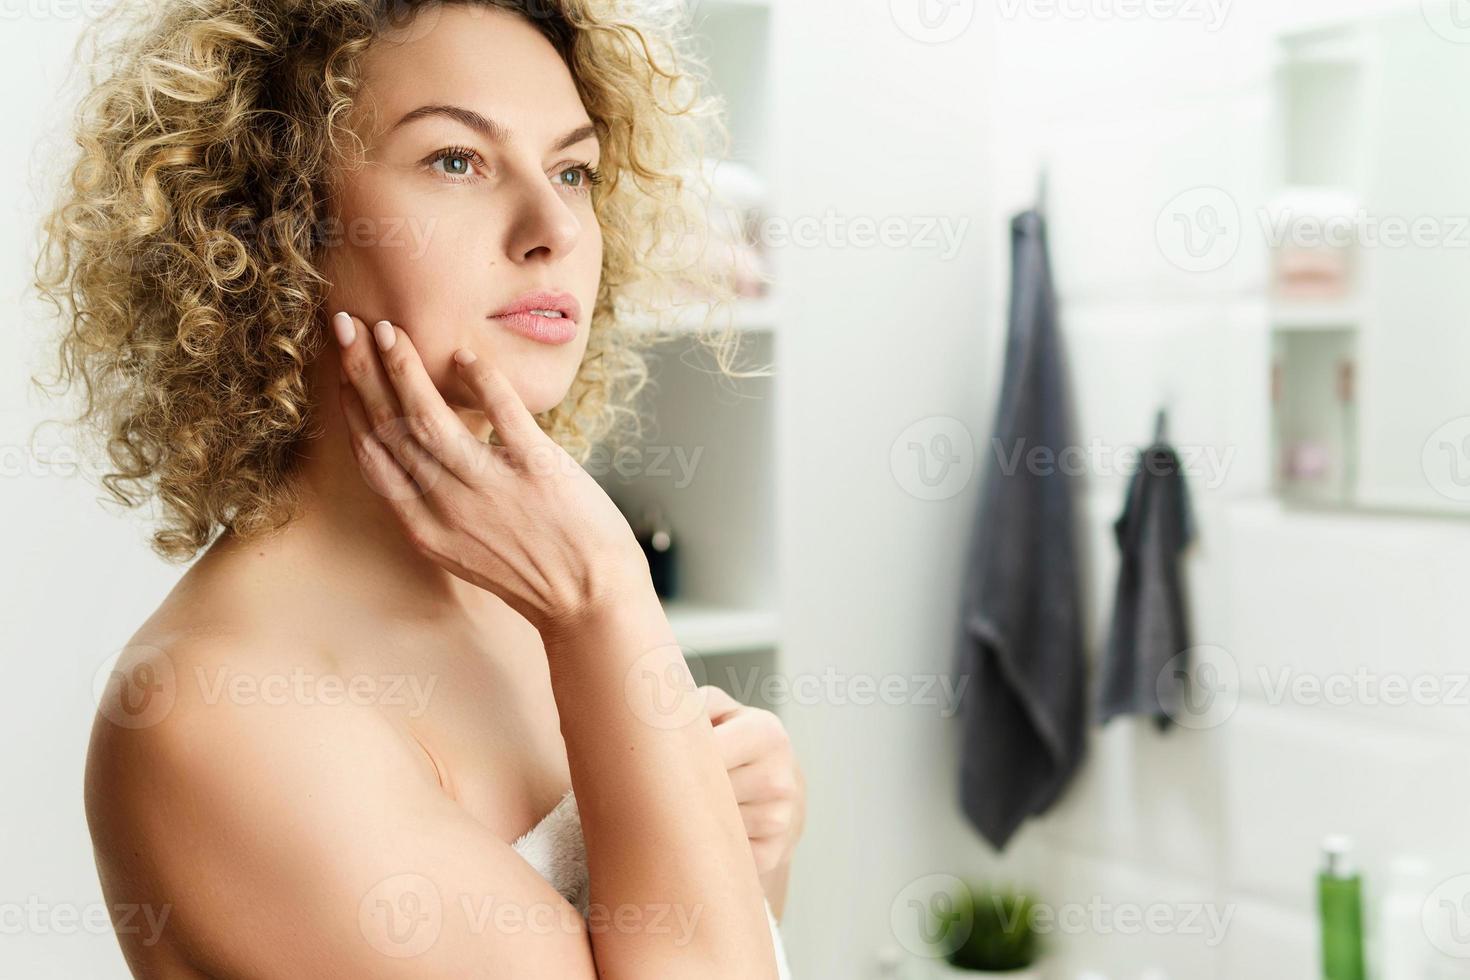 Beautiful woman with curly hair after a shower in a bathroom photo